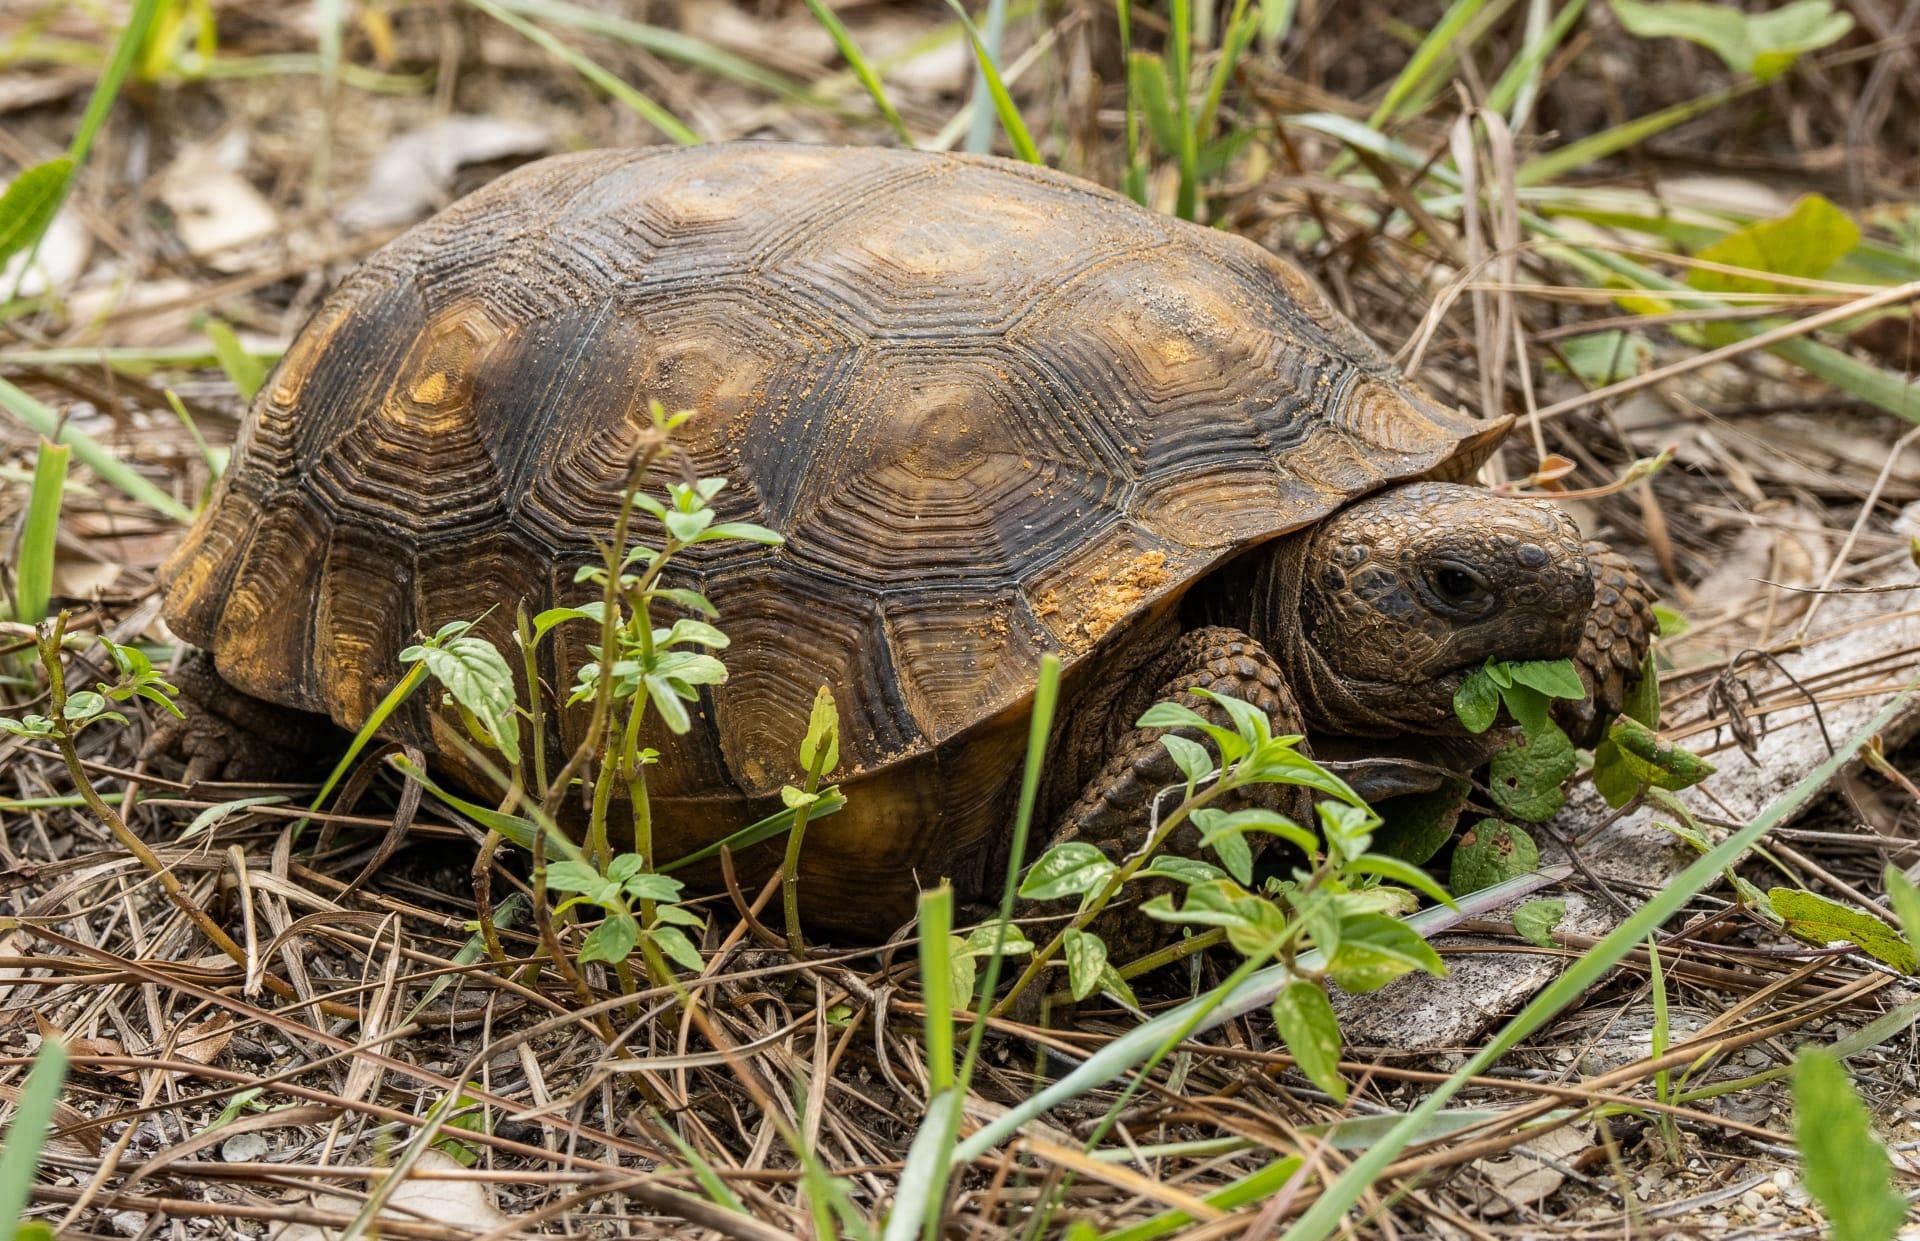 Gopher tortoise pictures